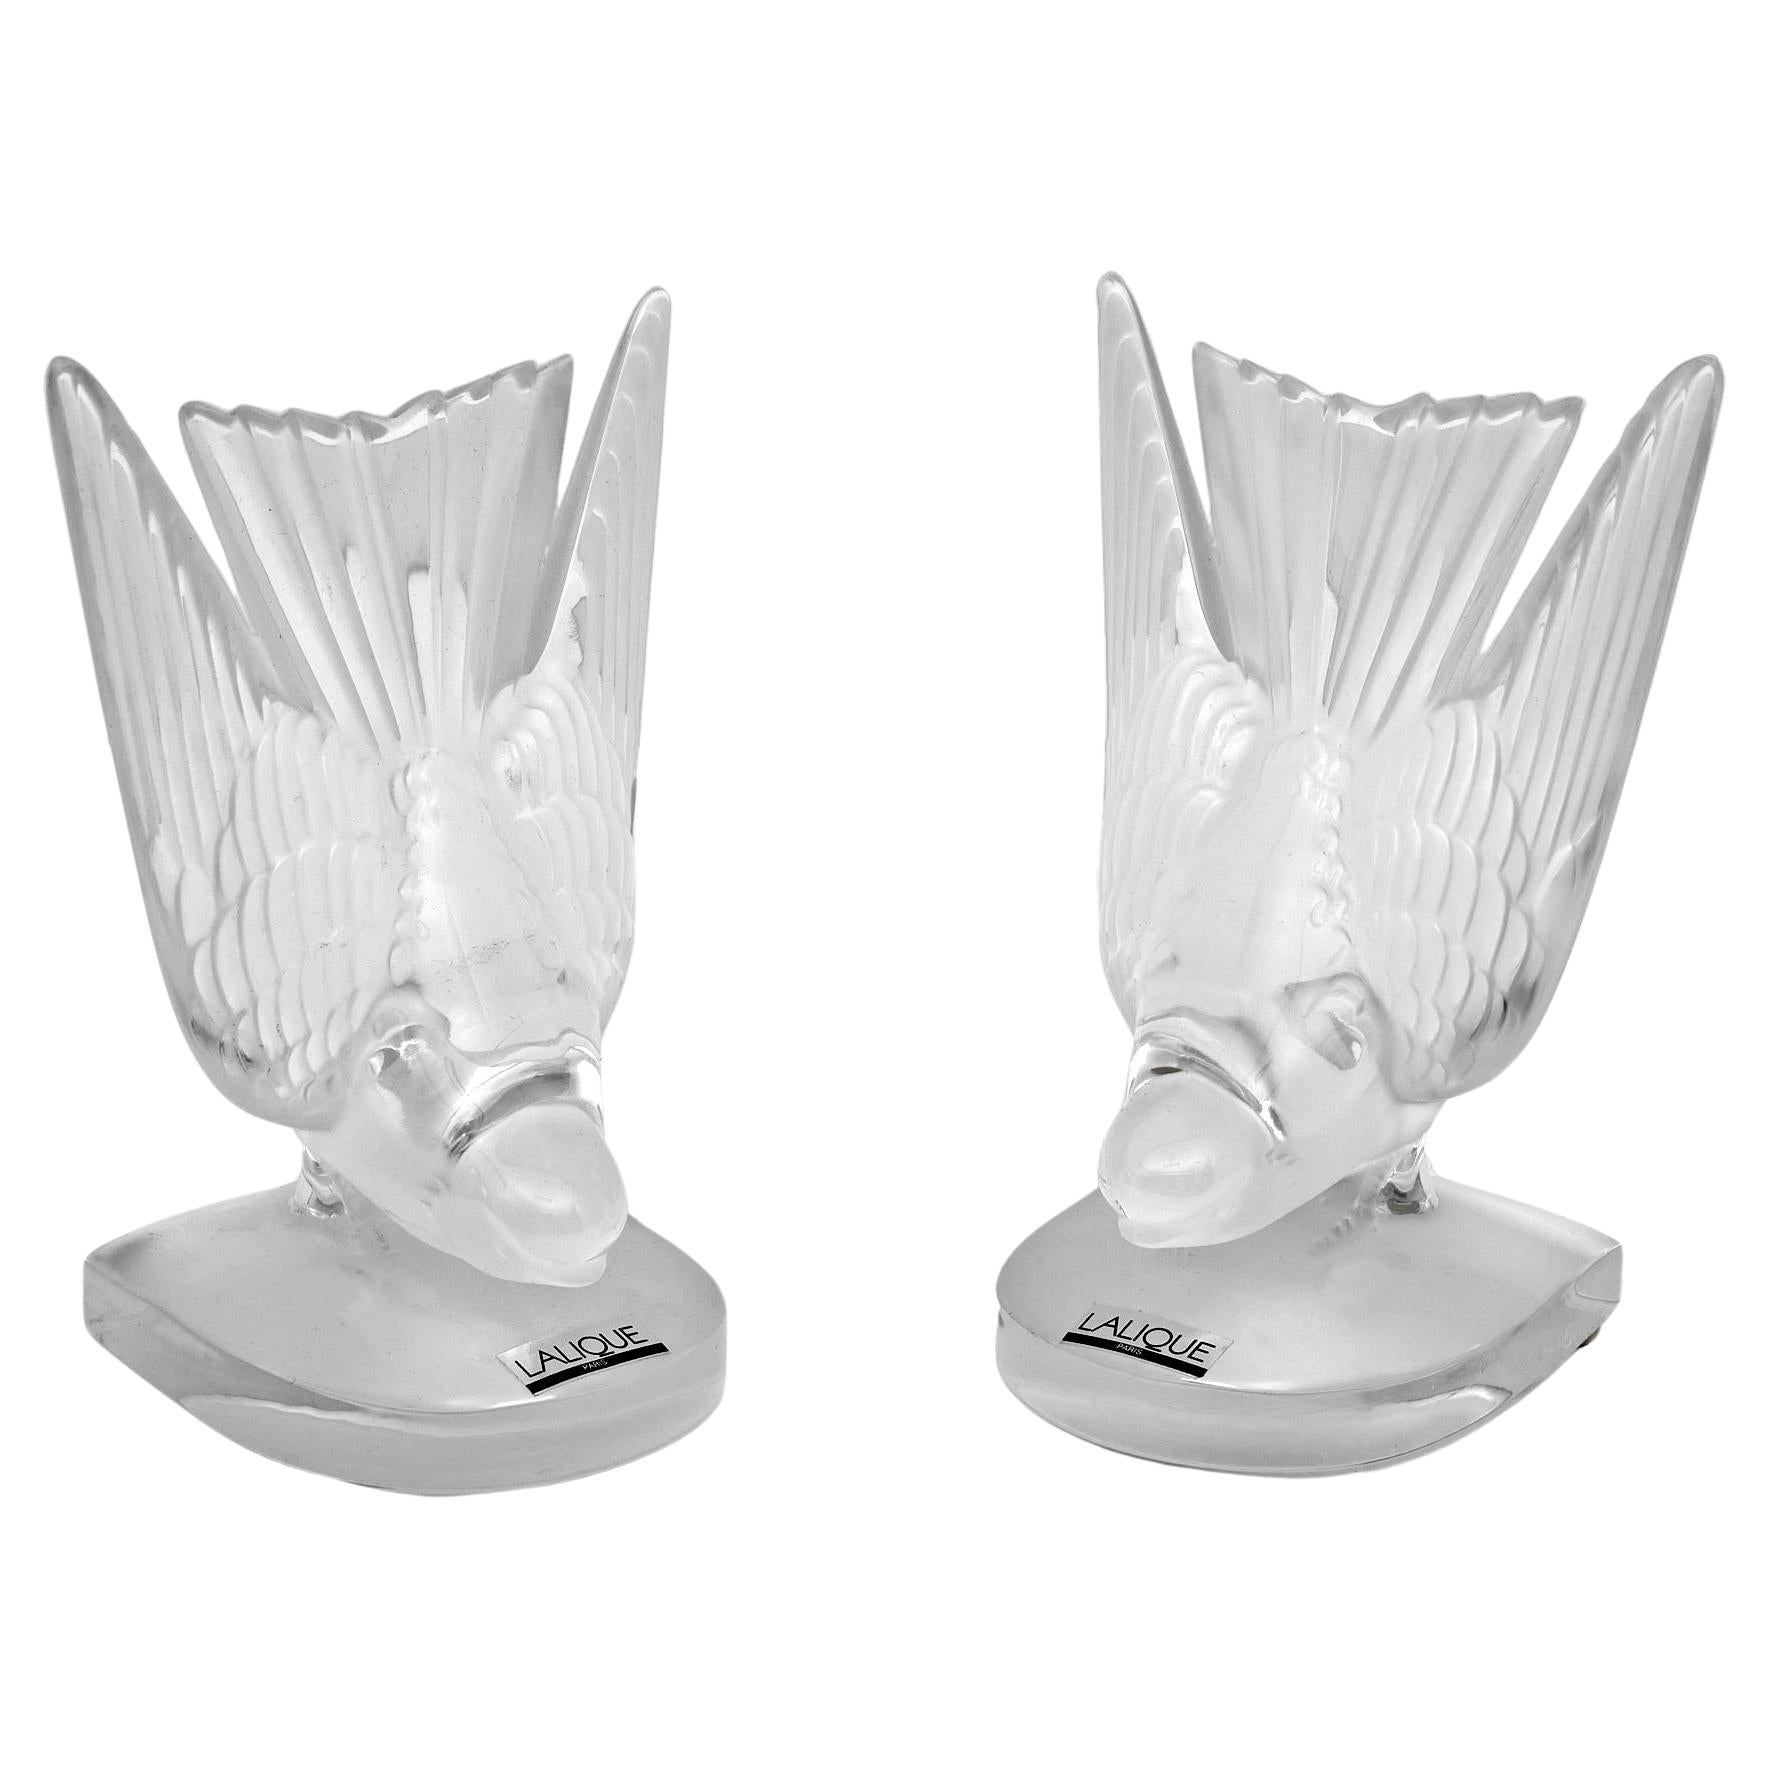 Pair of Art Decò Crystal Swallows Bookends by Lalique "Hirondelles" France 1980s For Sale